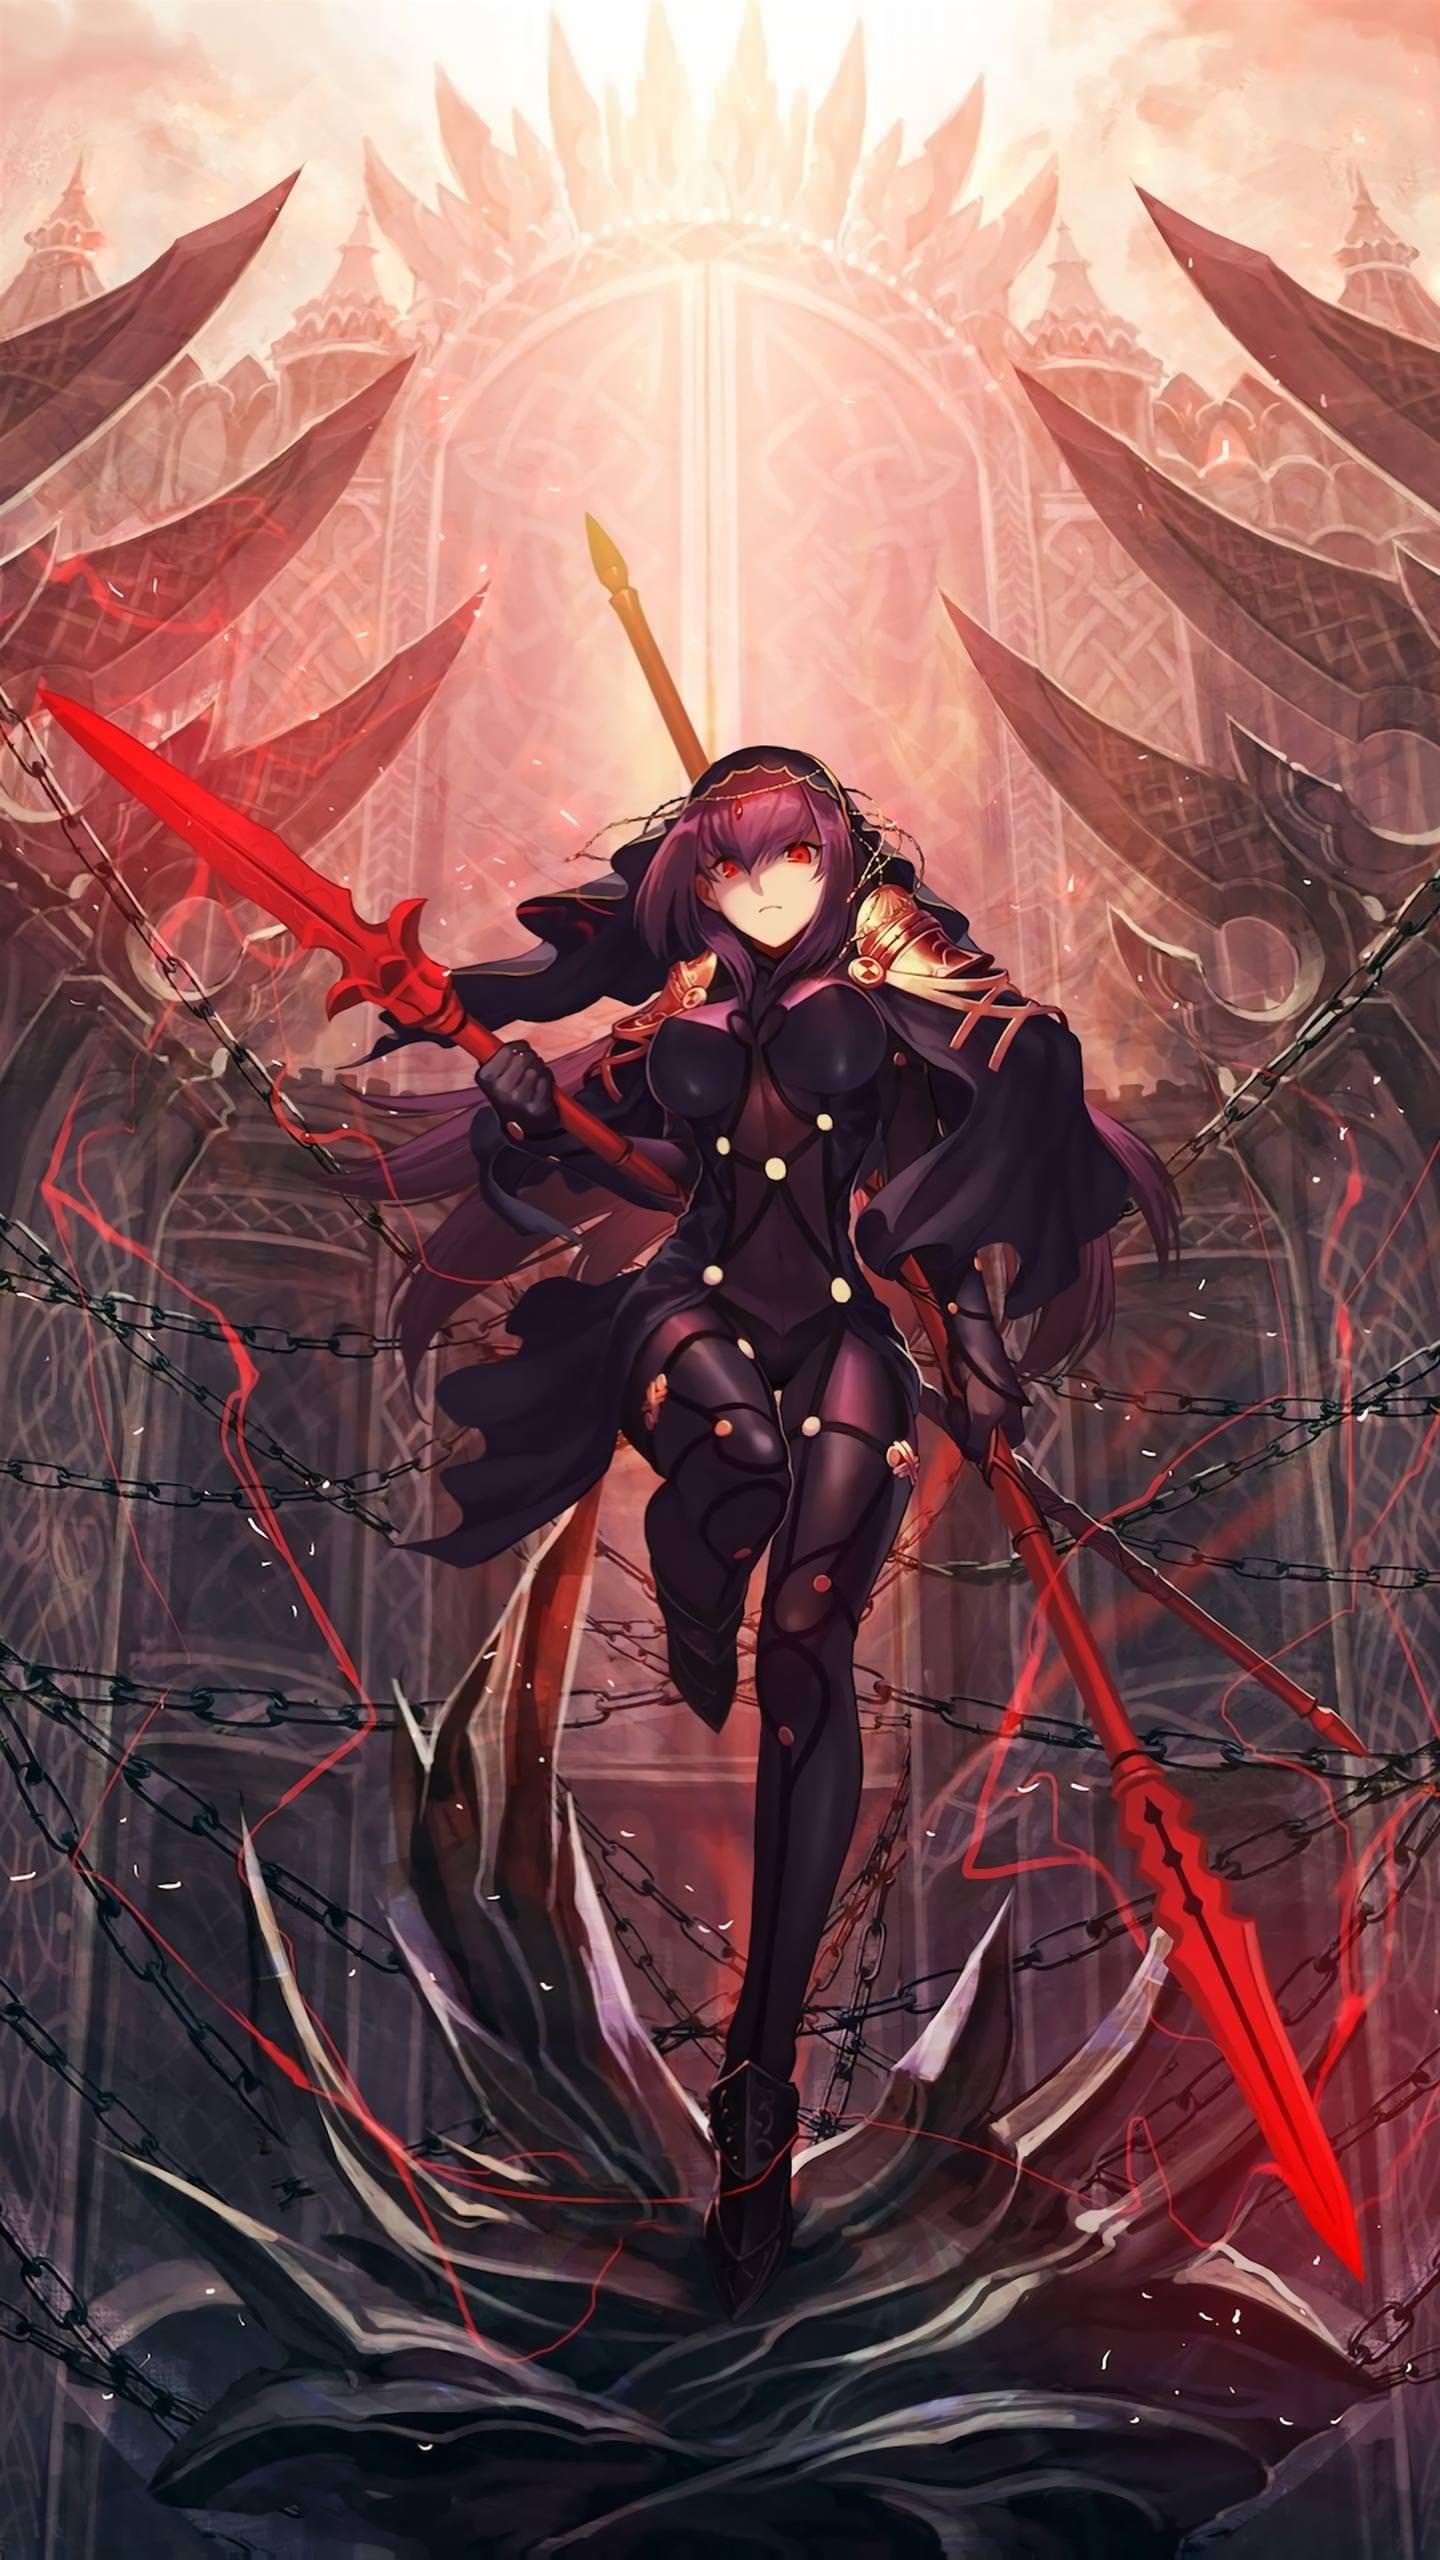 Just found my new wallpaper for now. Scathach always looks great